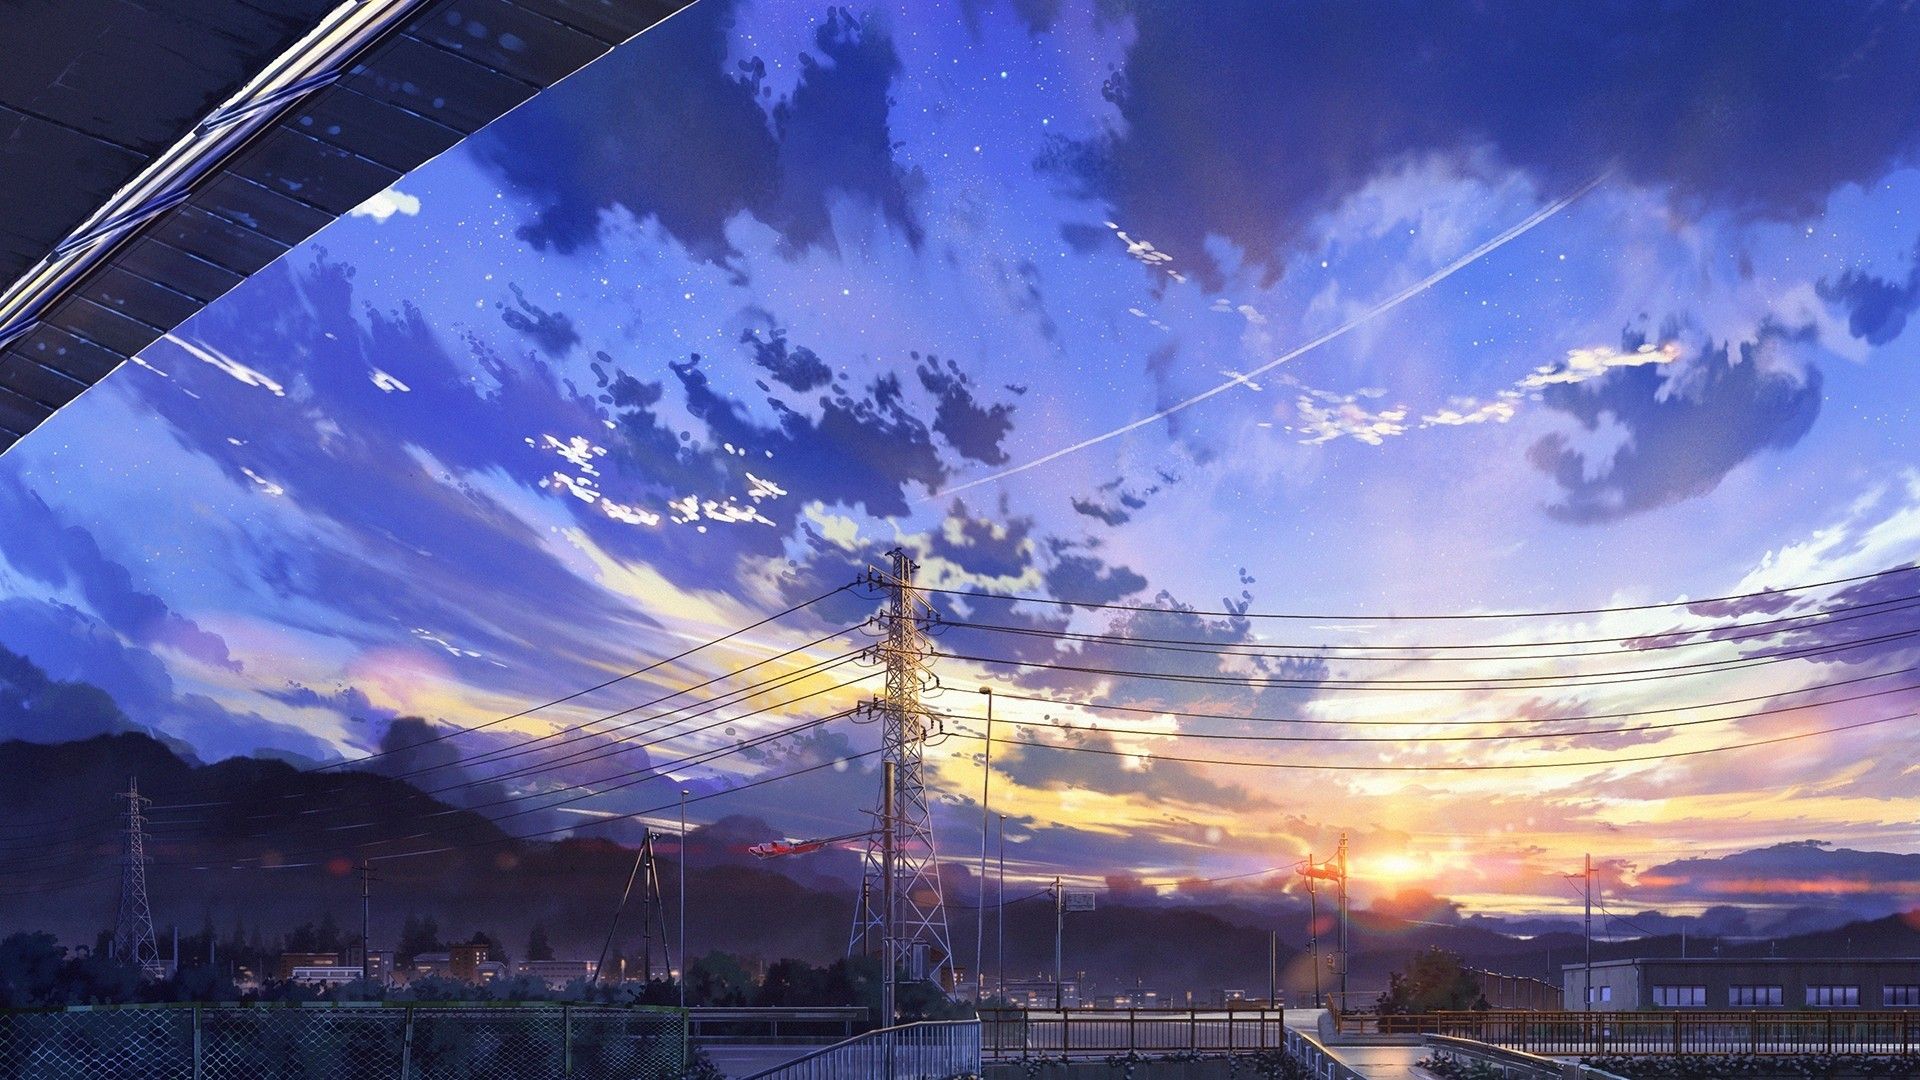 Download 1920x1080 Anime Landscape, Scenery, Clouds, Stars